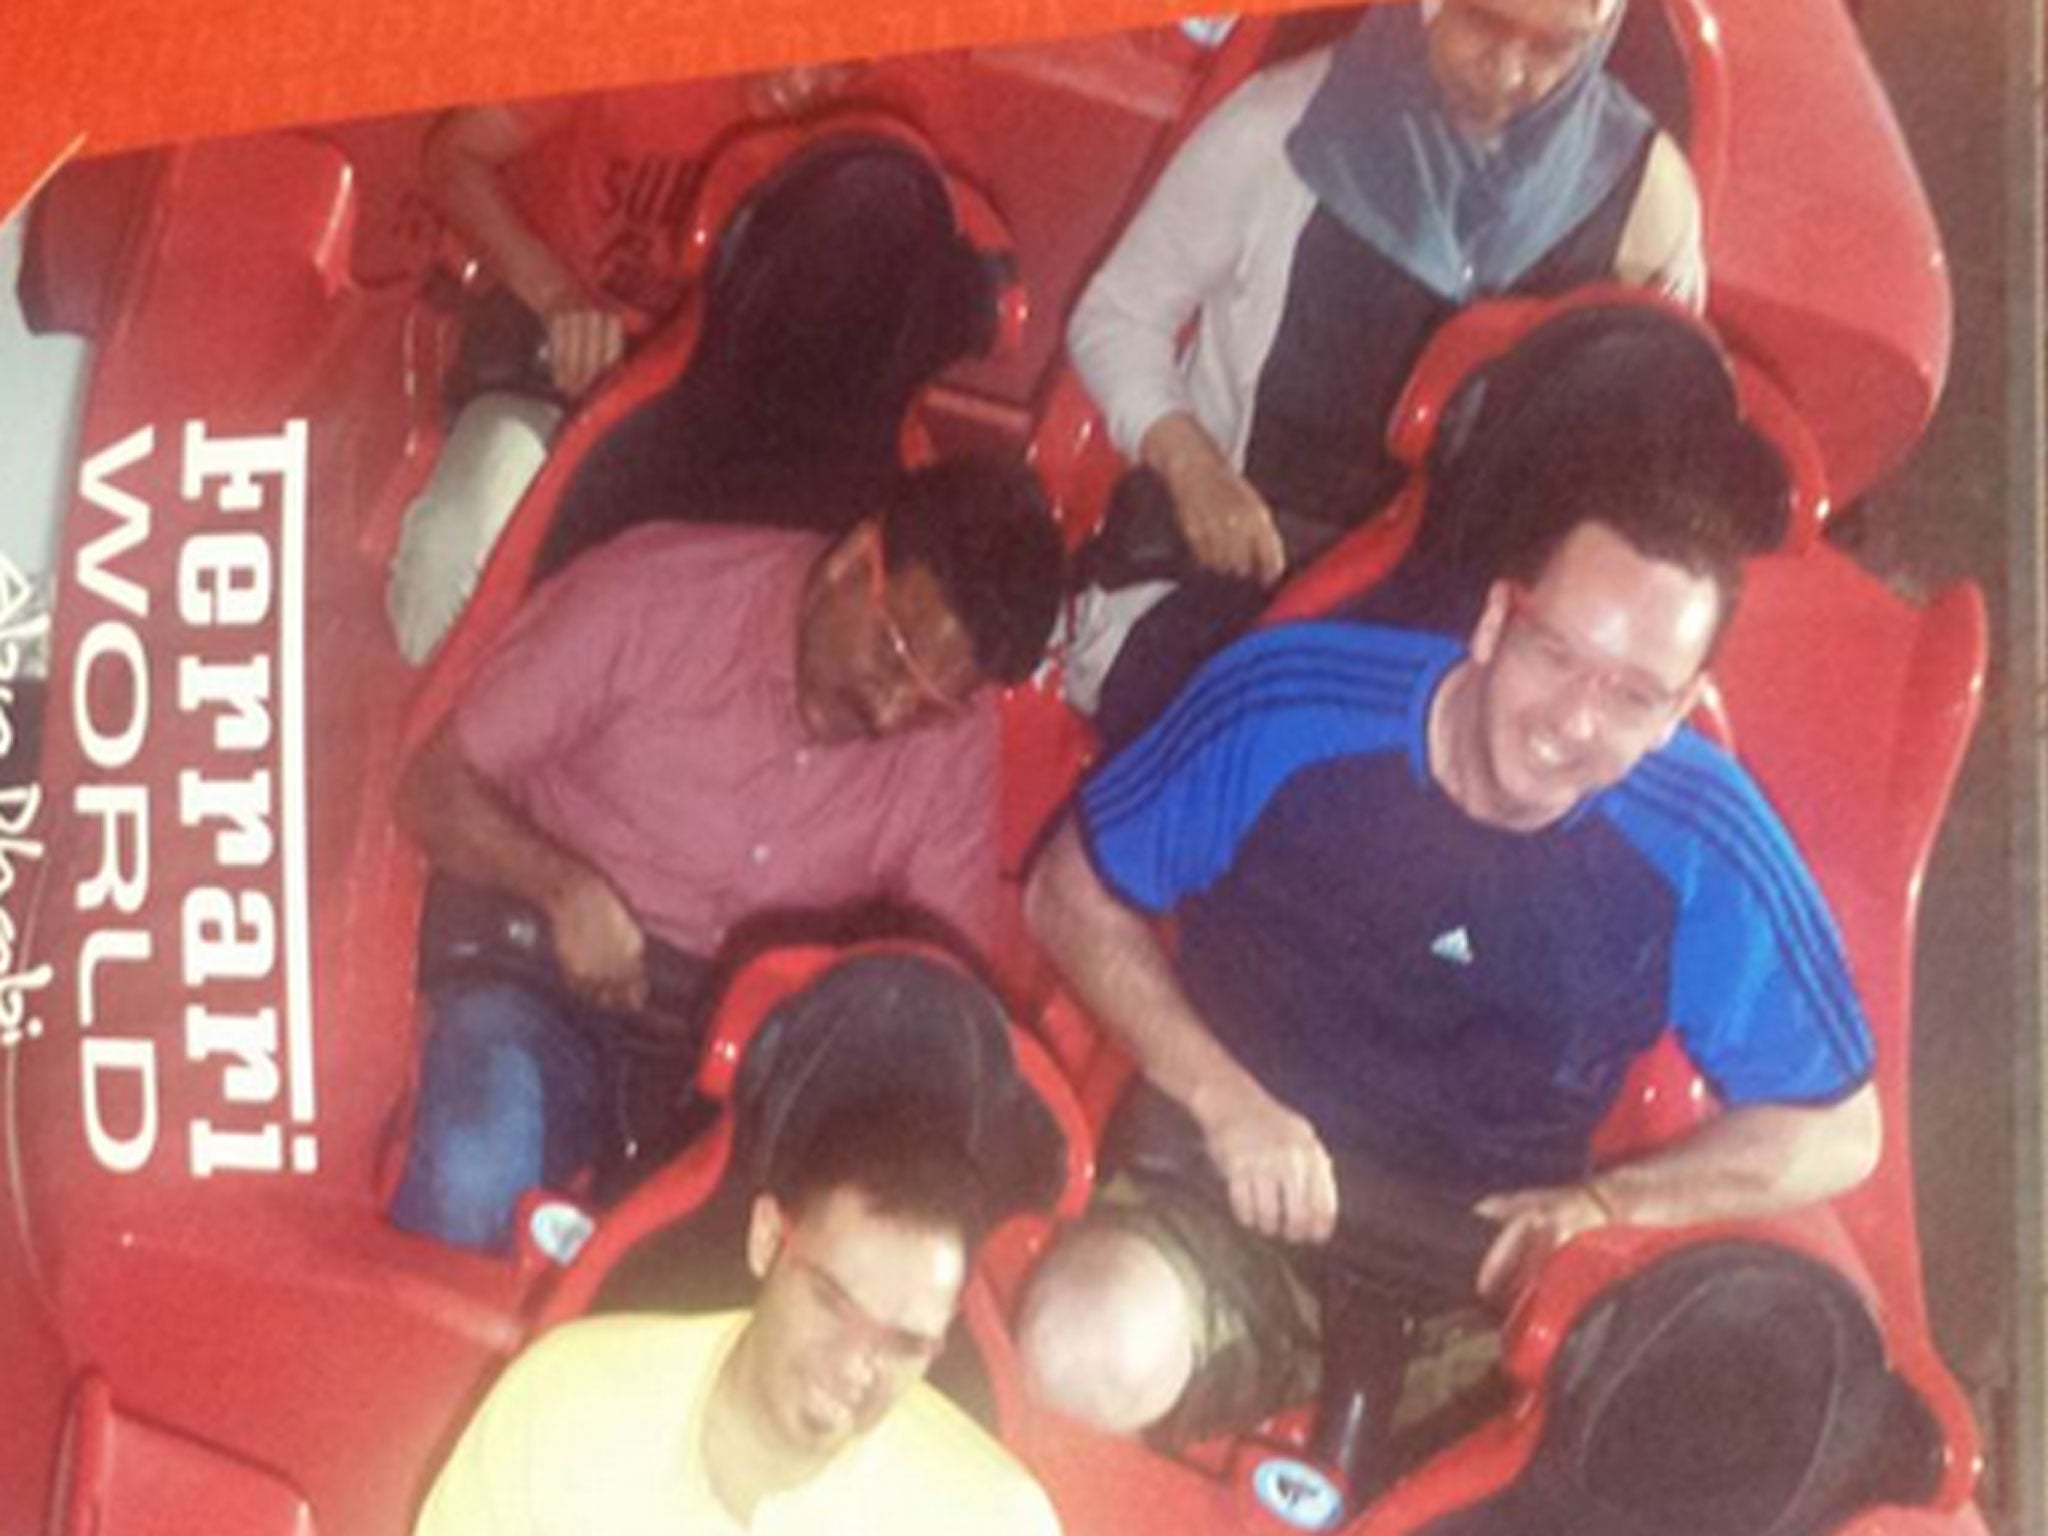 Liam Murphy and his taxi driver ride a rollercoaster